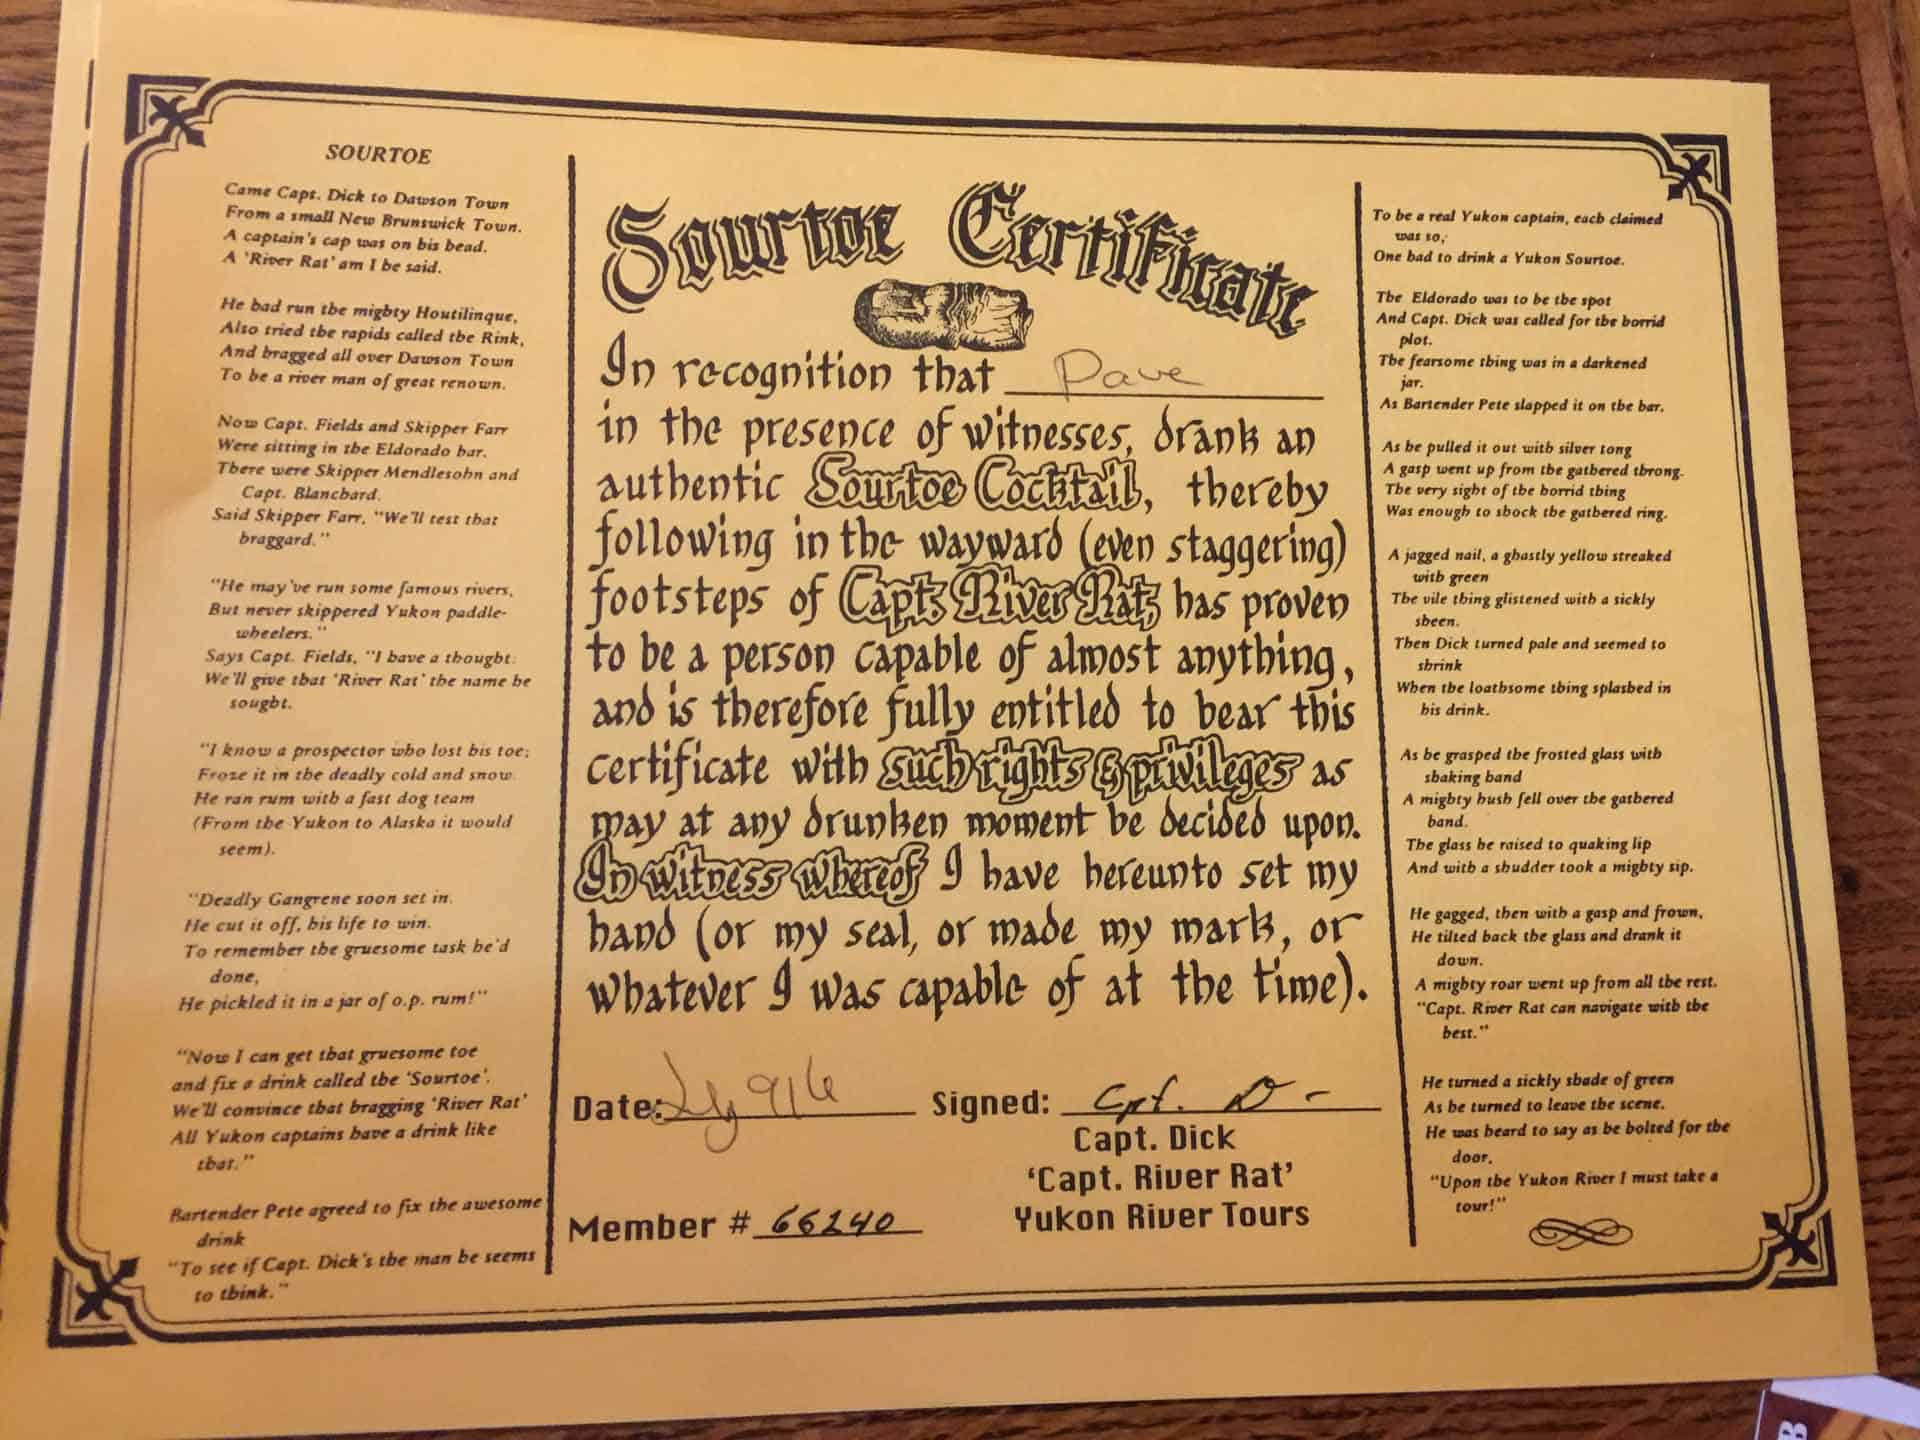 Our certificate proving we drank the sour toe cocktail